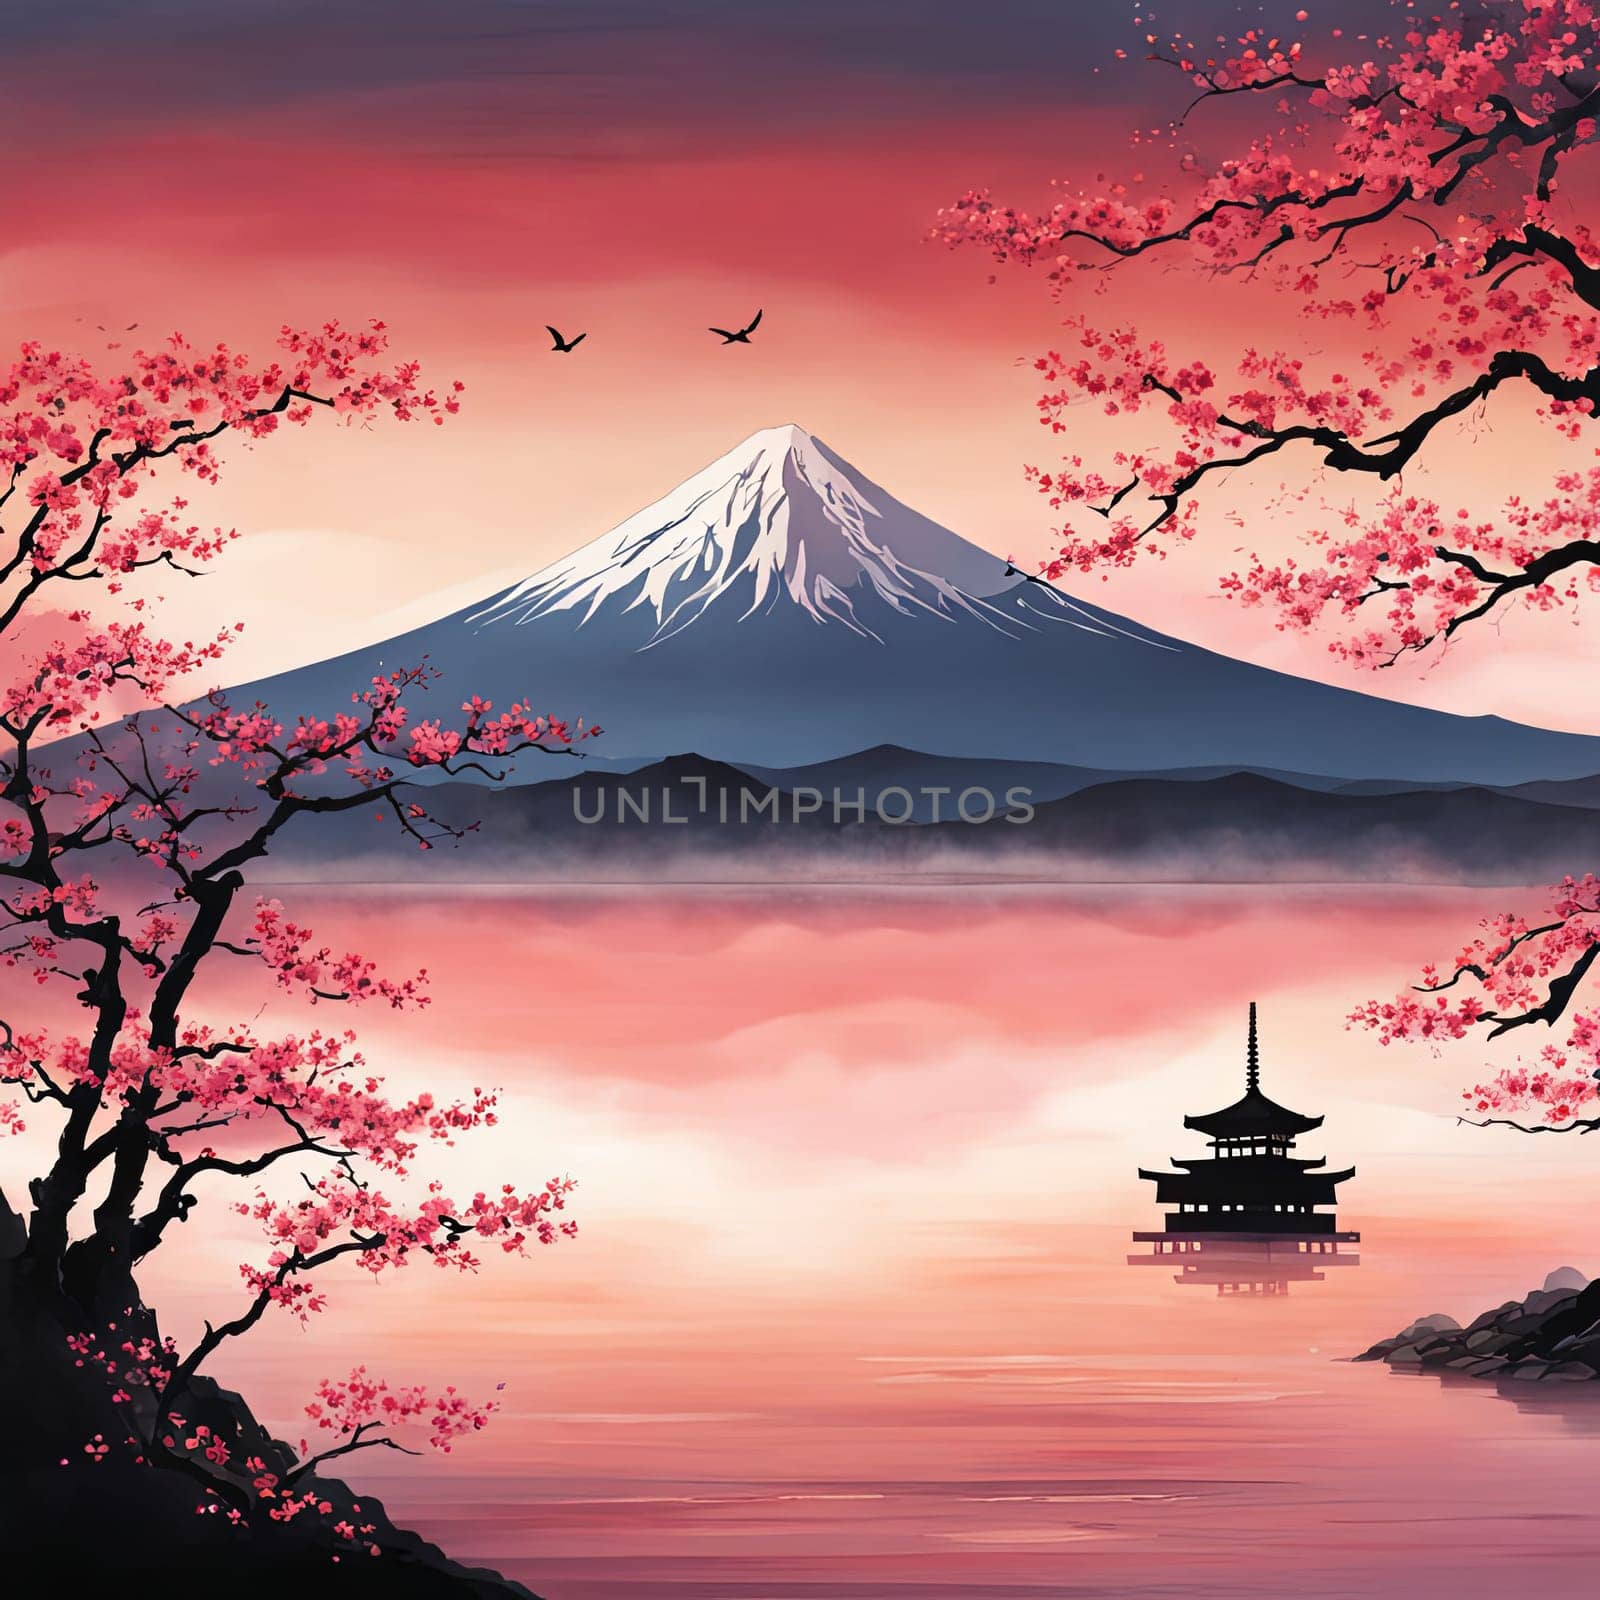 Serene Japanese landscape with mountain, cherry blossom tree. Cherry blossoms are in full bloom, creating beautiful, peaceful atmosphere. For interior, commercial spaces to create stylish atmosphere. by Angelsmoon